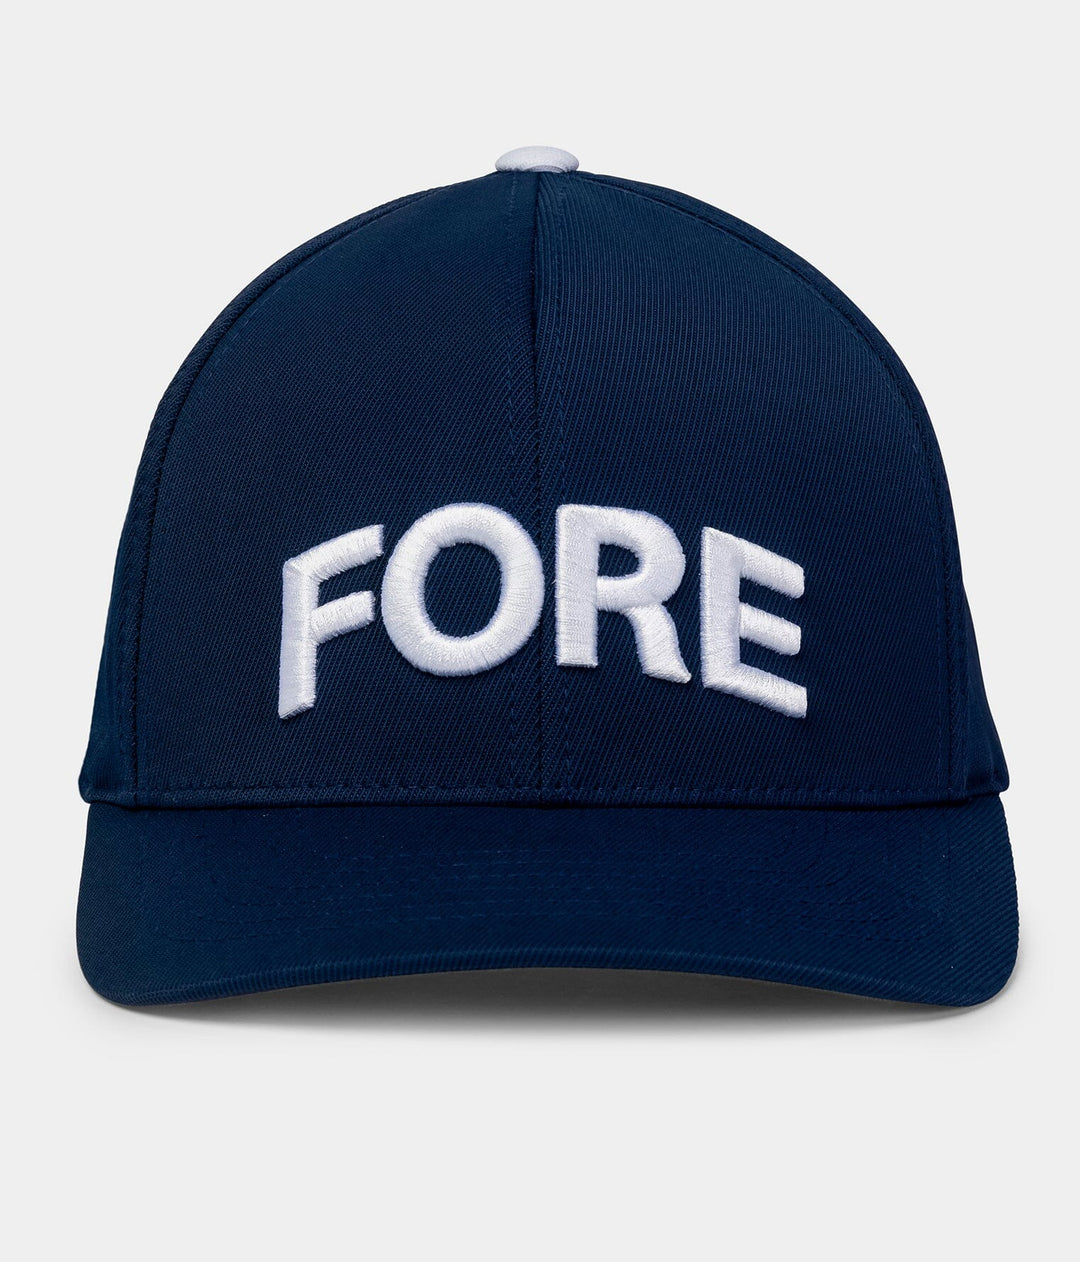 FORE Snapback Hat